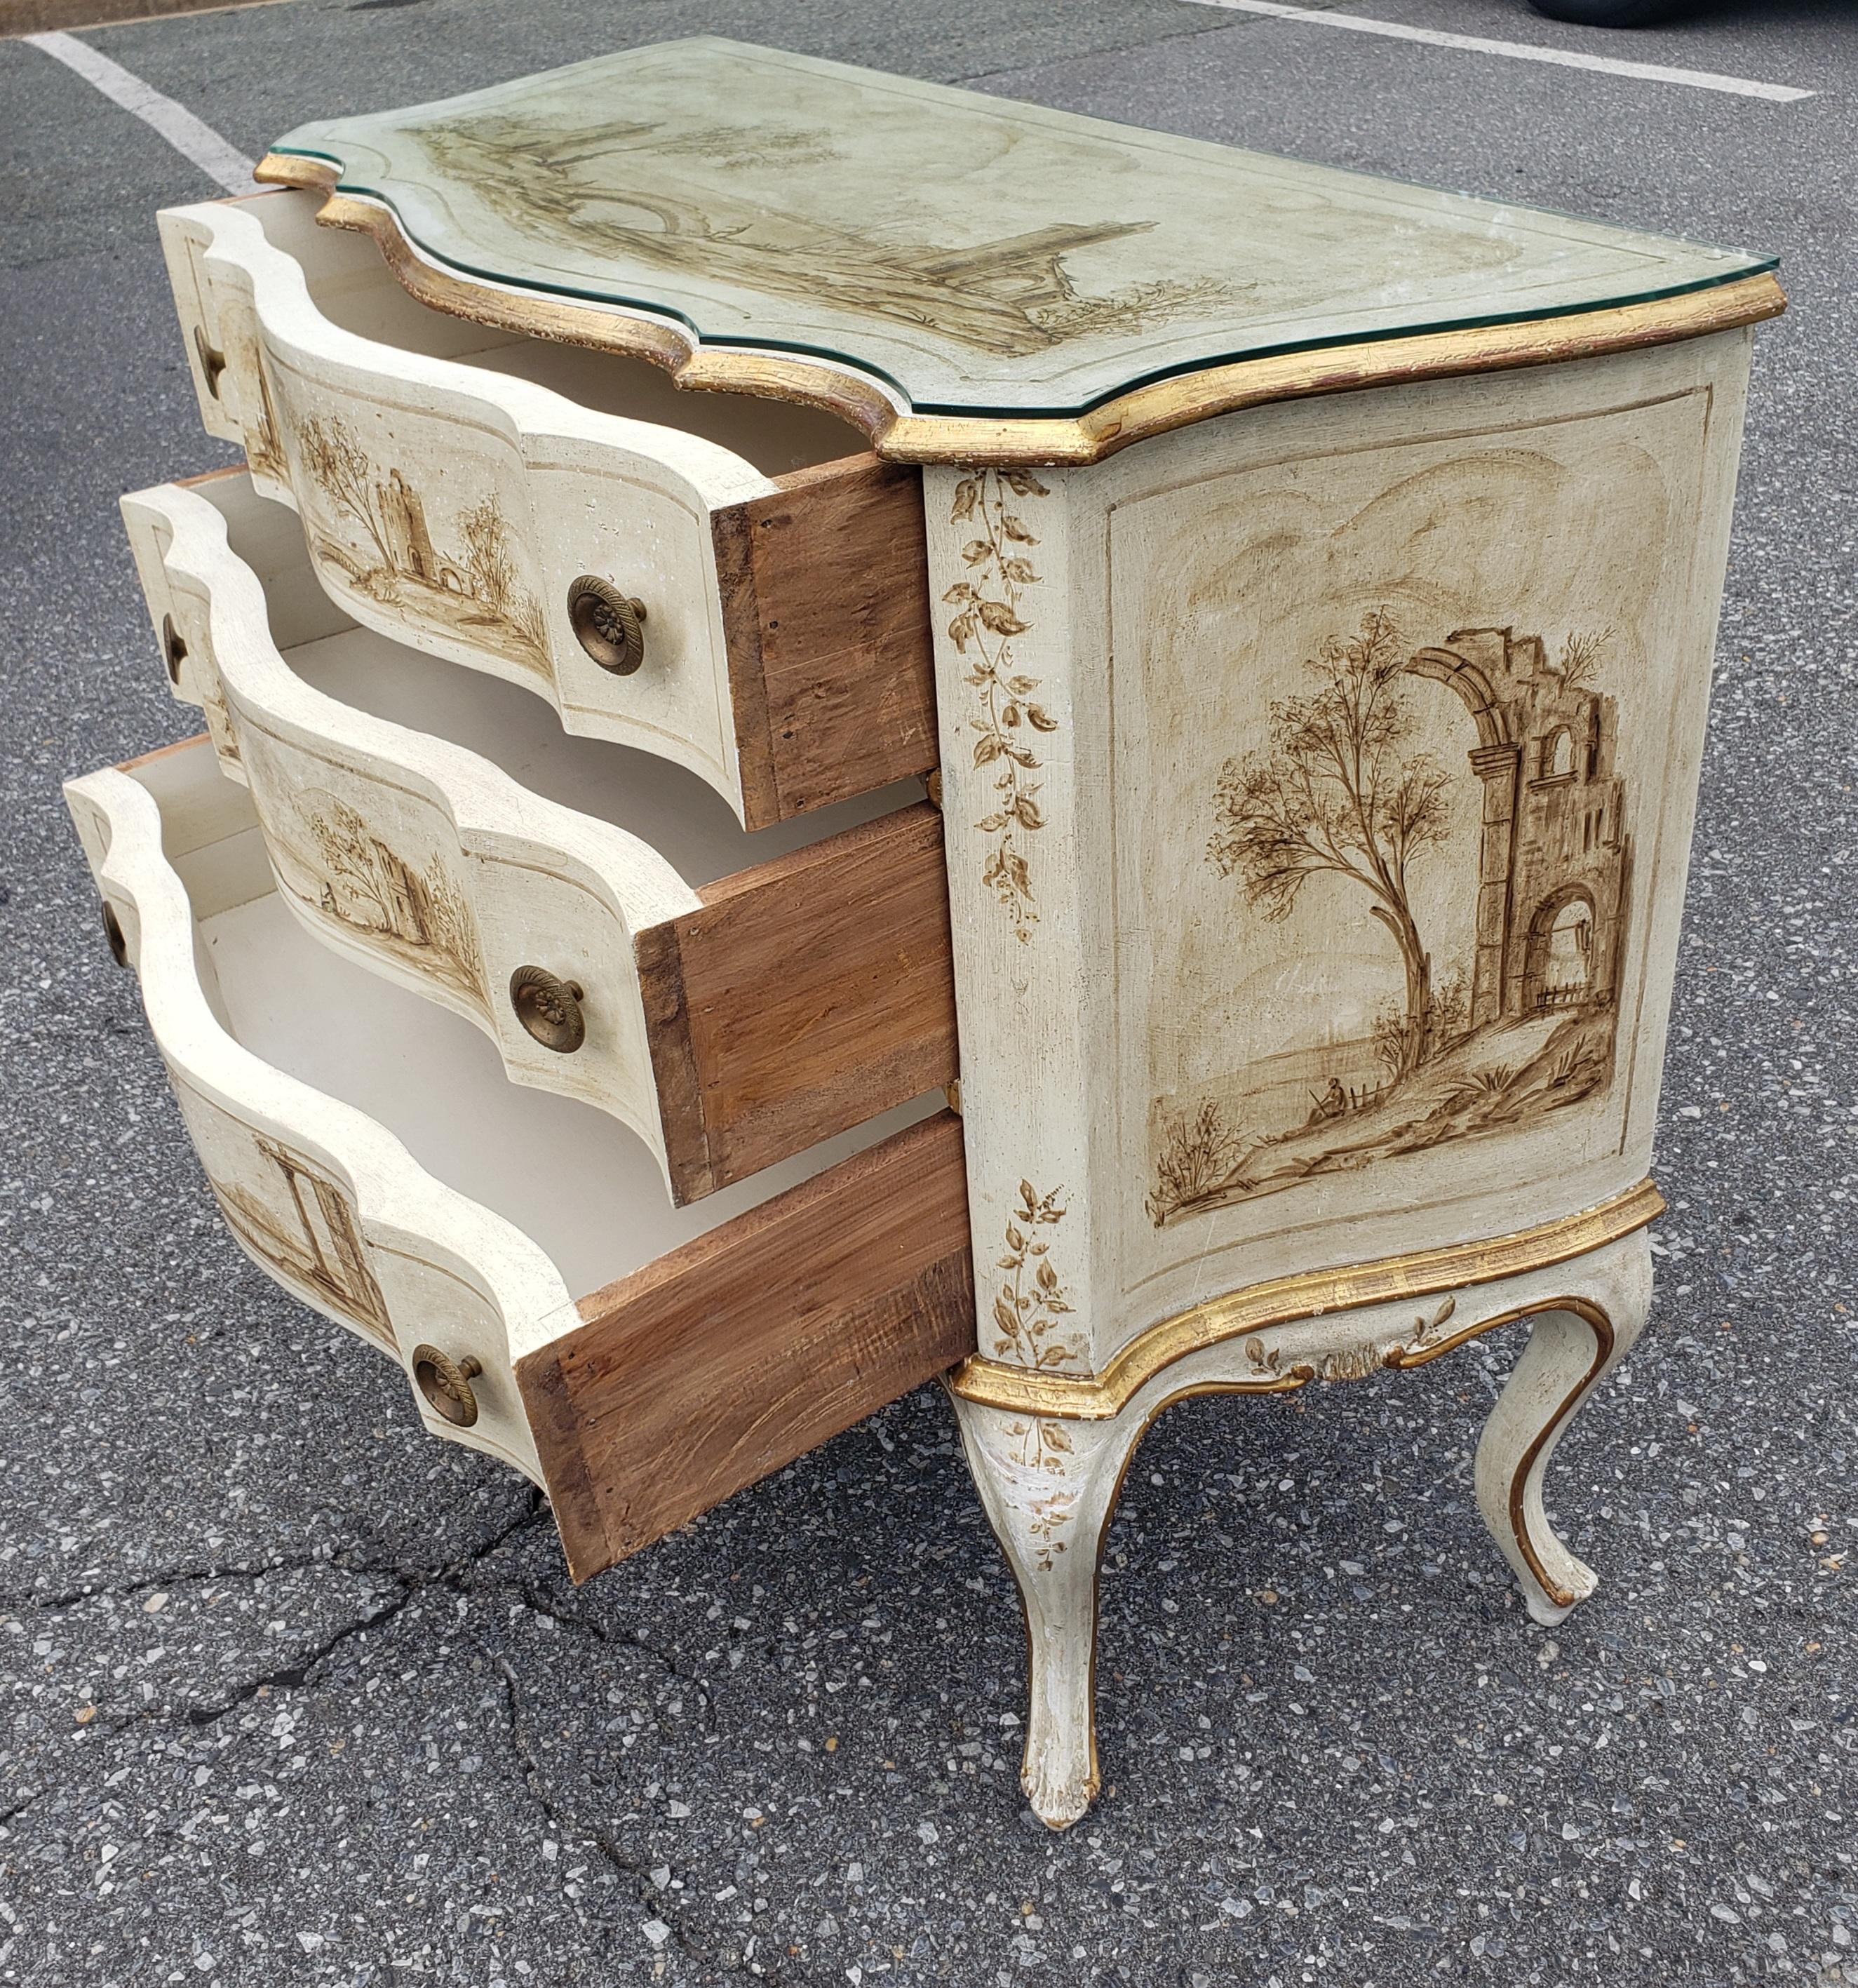 Early 20th C. Venetian Hand-Painted and Decorated Partial Gilt Commode w/ Glass For Sale 3